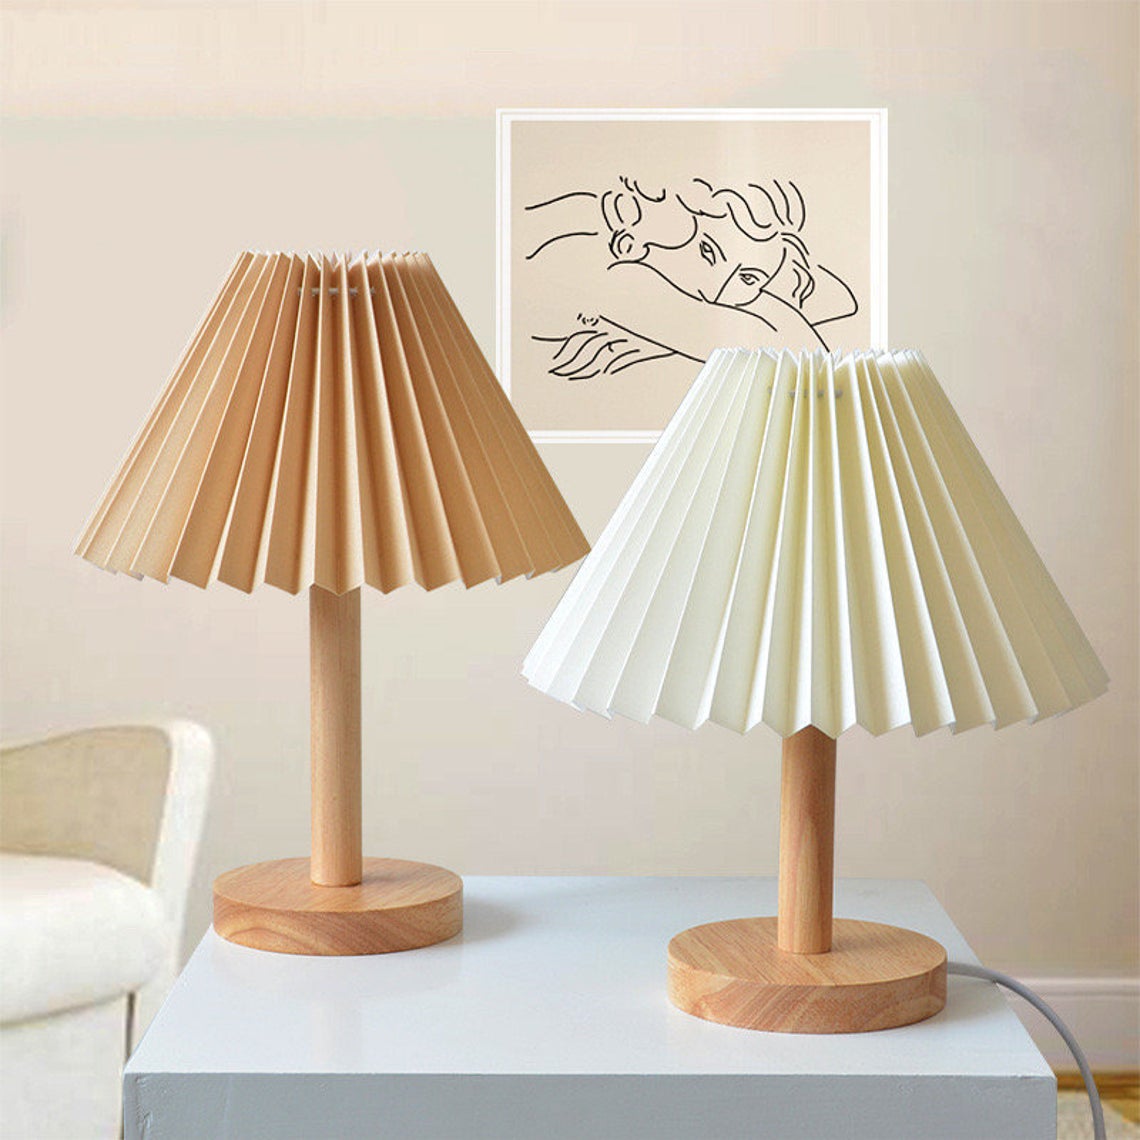 Wood Table Lamps Living Room Pleated, Handmade Wooden Table Lamps